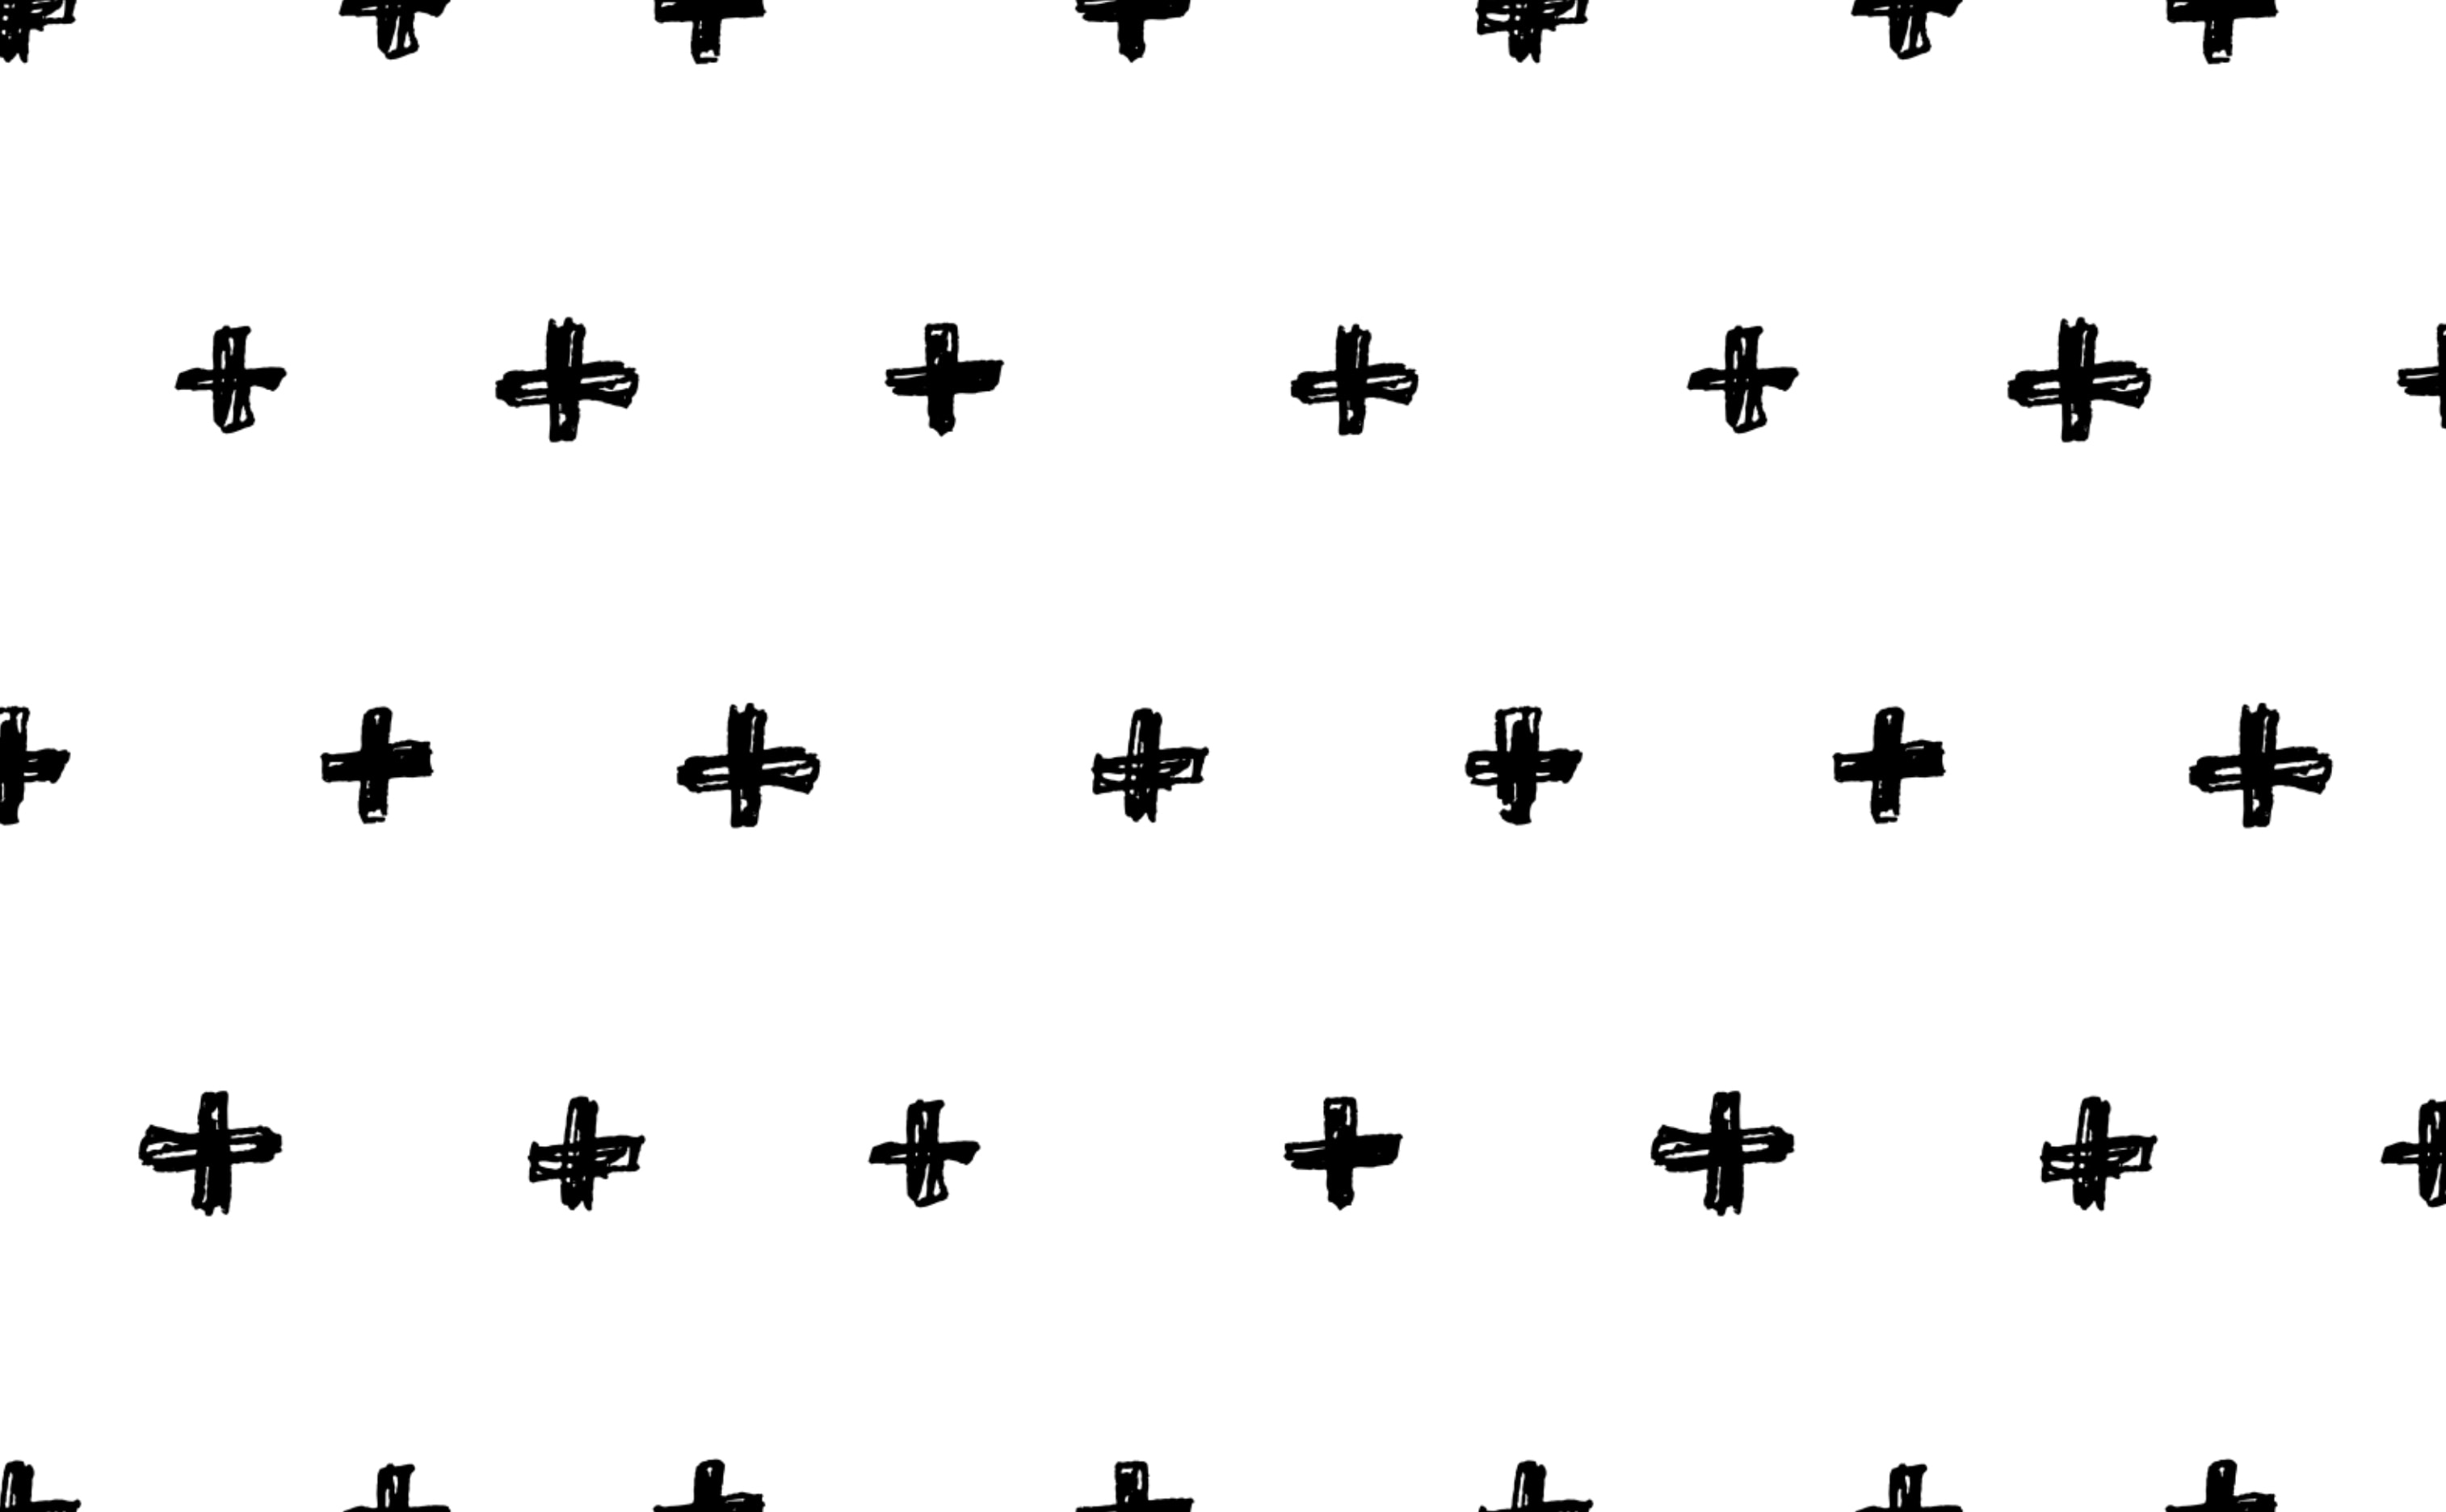 Rows of Black & White Plus Signs Wallpaper for Walls. Inked Swiss Cross